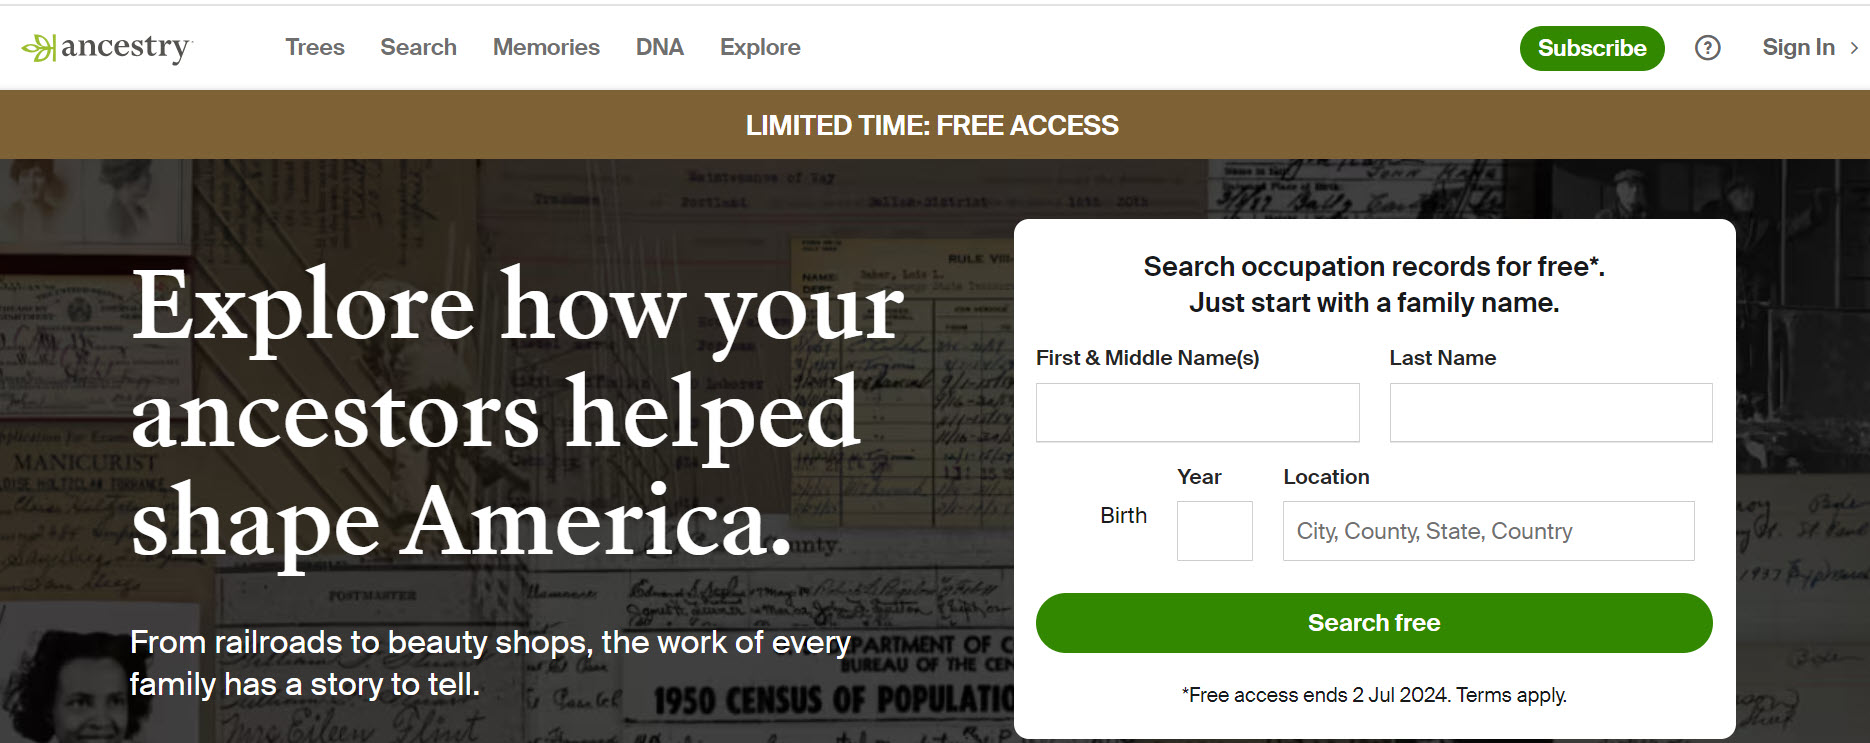 Ancestry for Free: Explore how your ancestors helped shape America